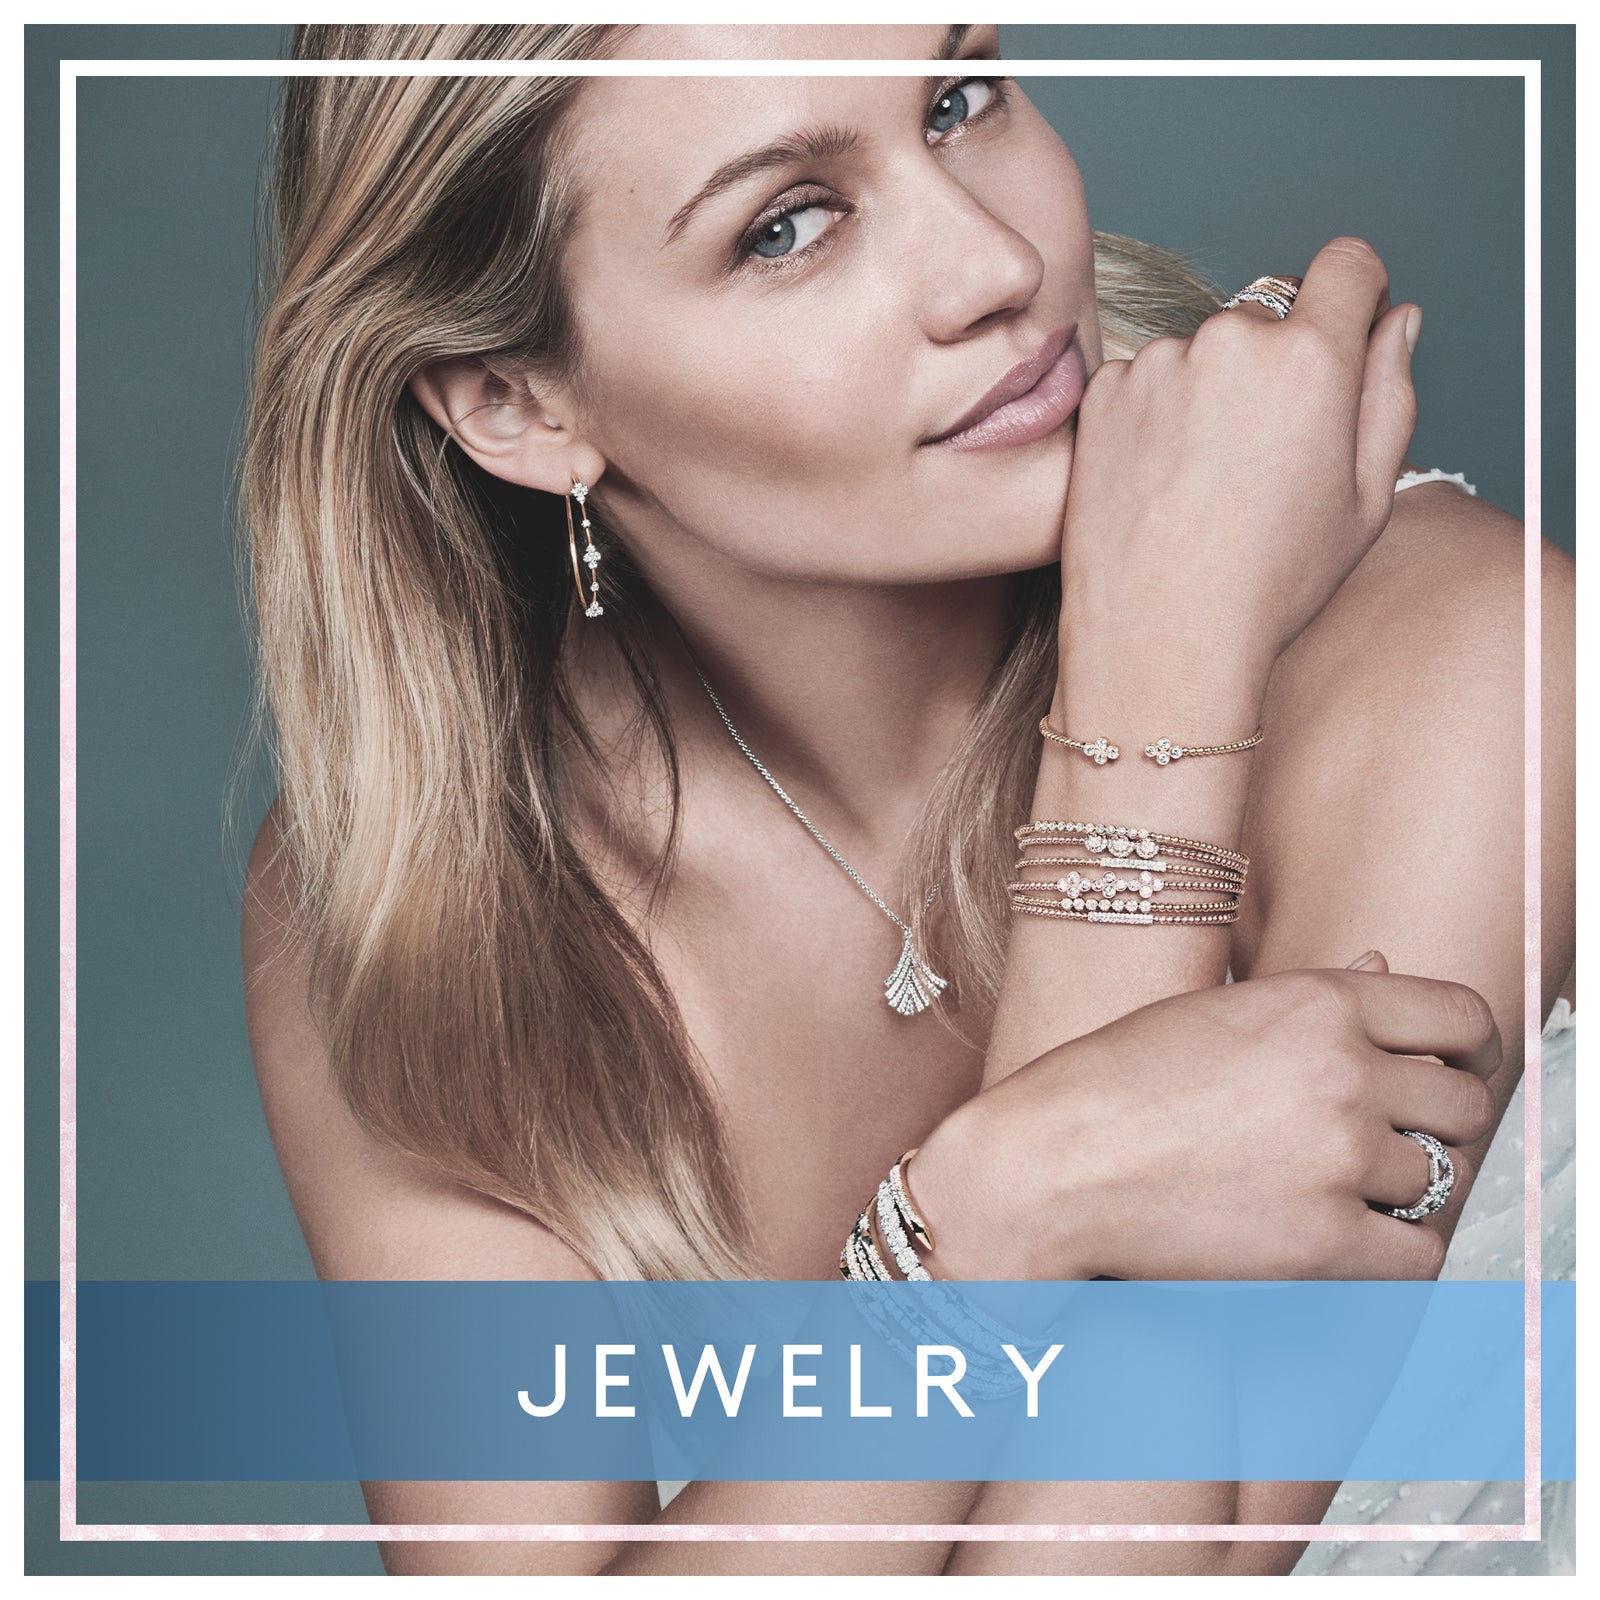 10 Top Jewellery Brands In The World You Must Know Of | LBB